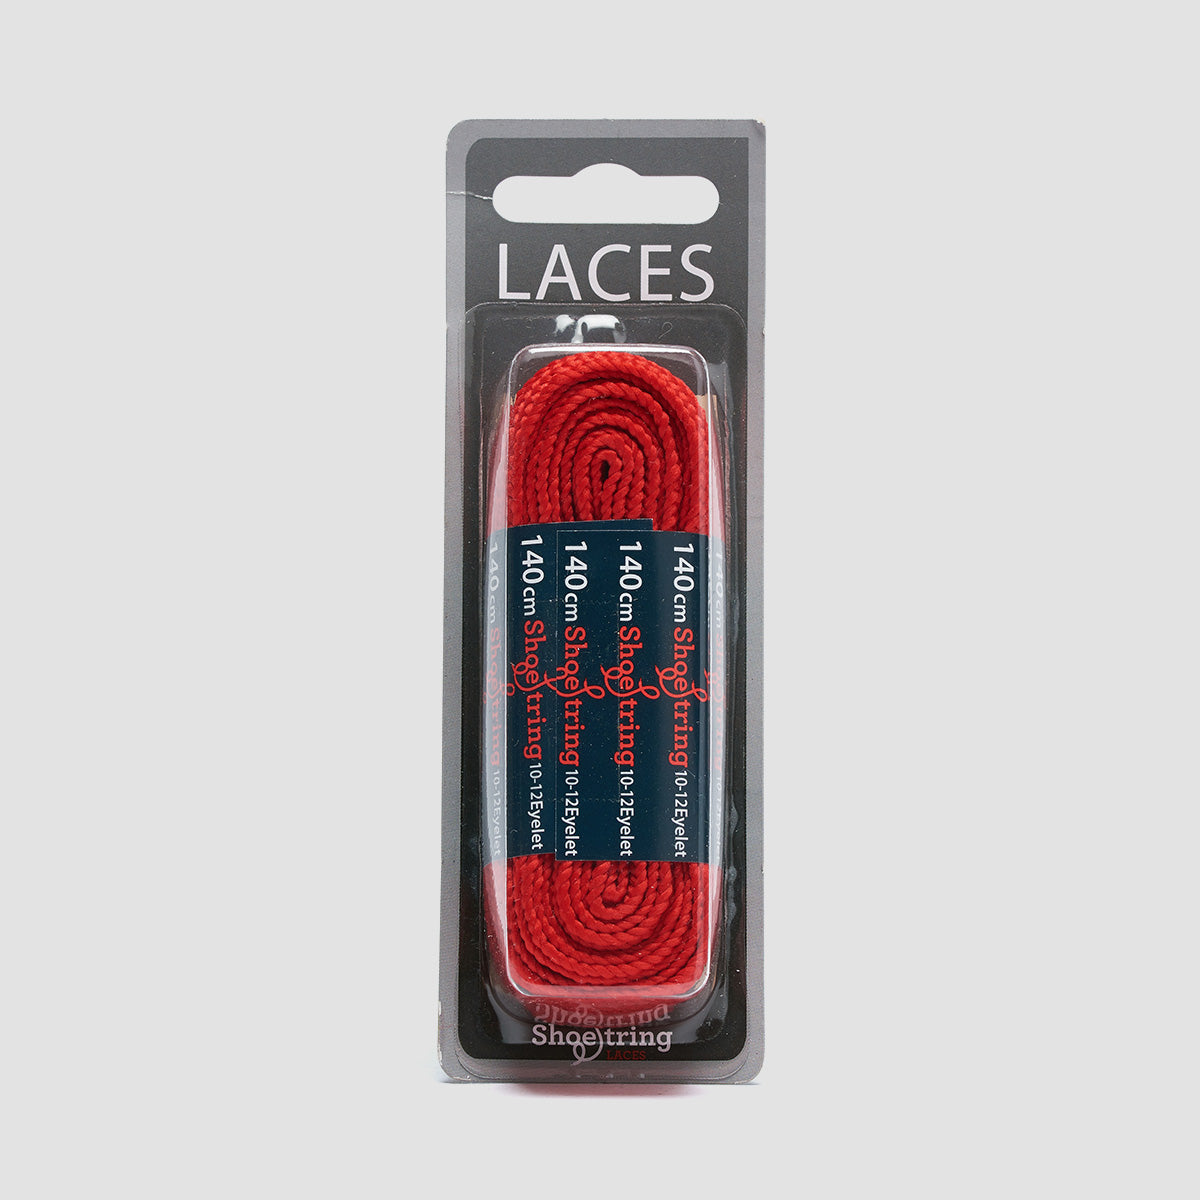 ShoeString Crazy Wide 140cm Fat Flat Laces (Blister Pack) Red